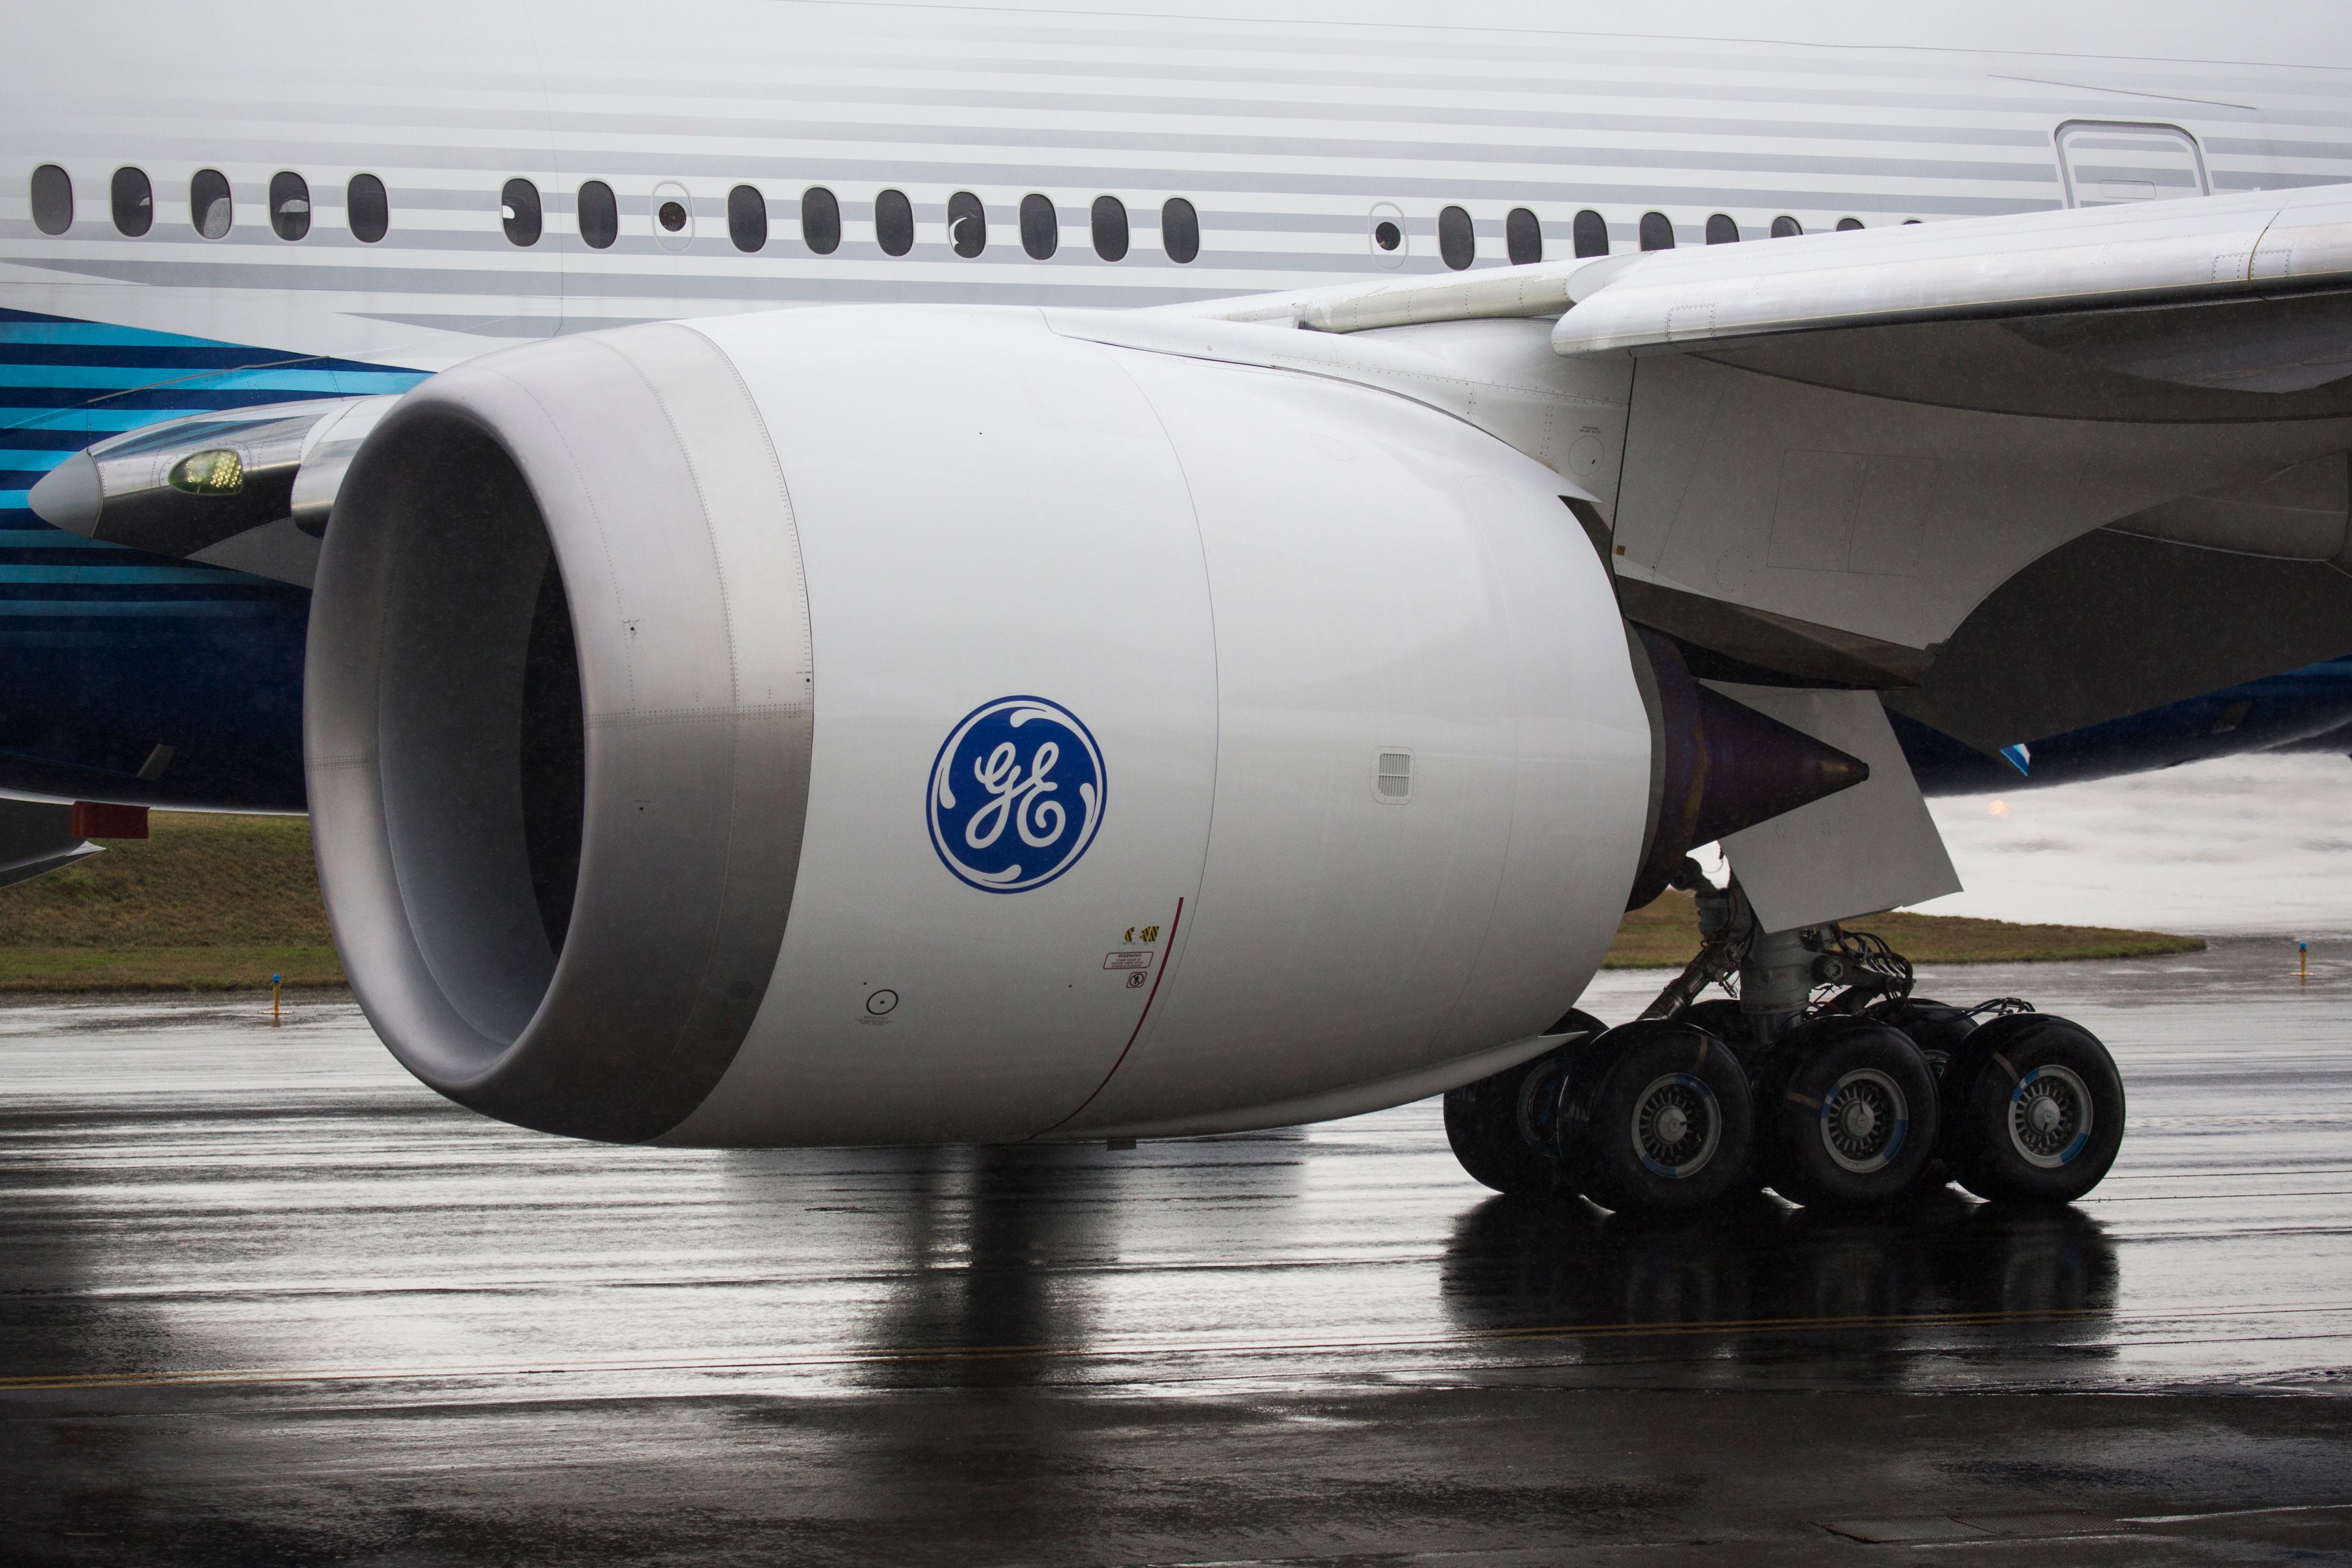 Why did General Electric make the GE9x highbypass turbofan engine less  powerful than the older GE90 engine even though the GE9x is intended to  power the Boeing 777X and 7779 airliner that